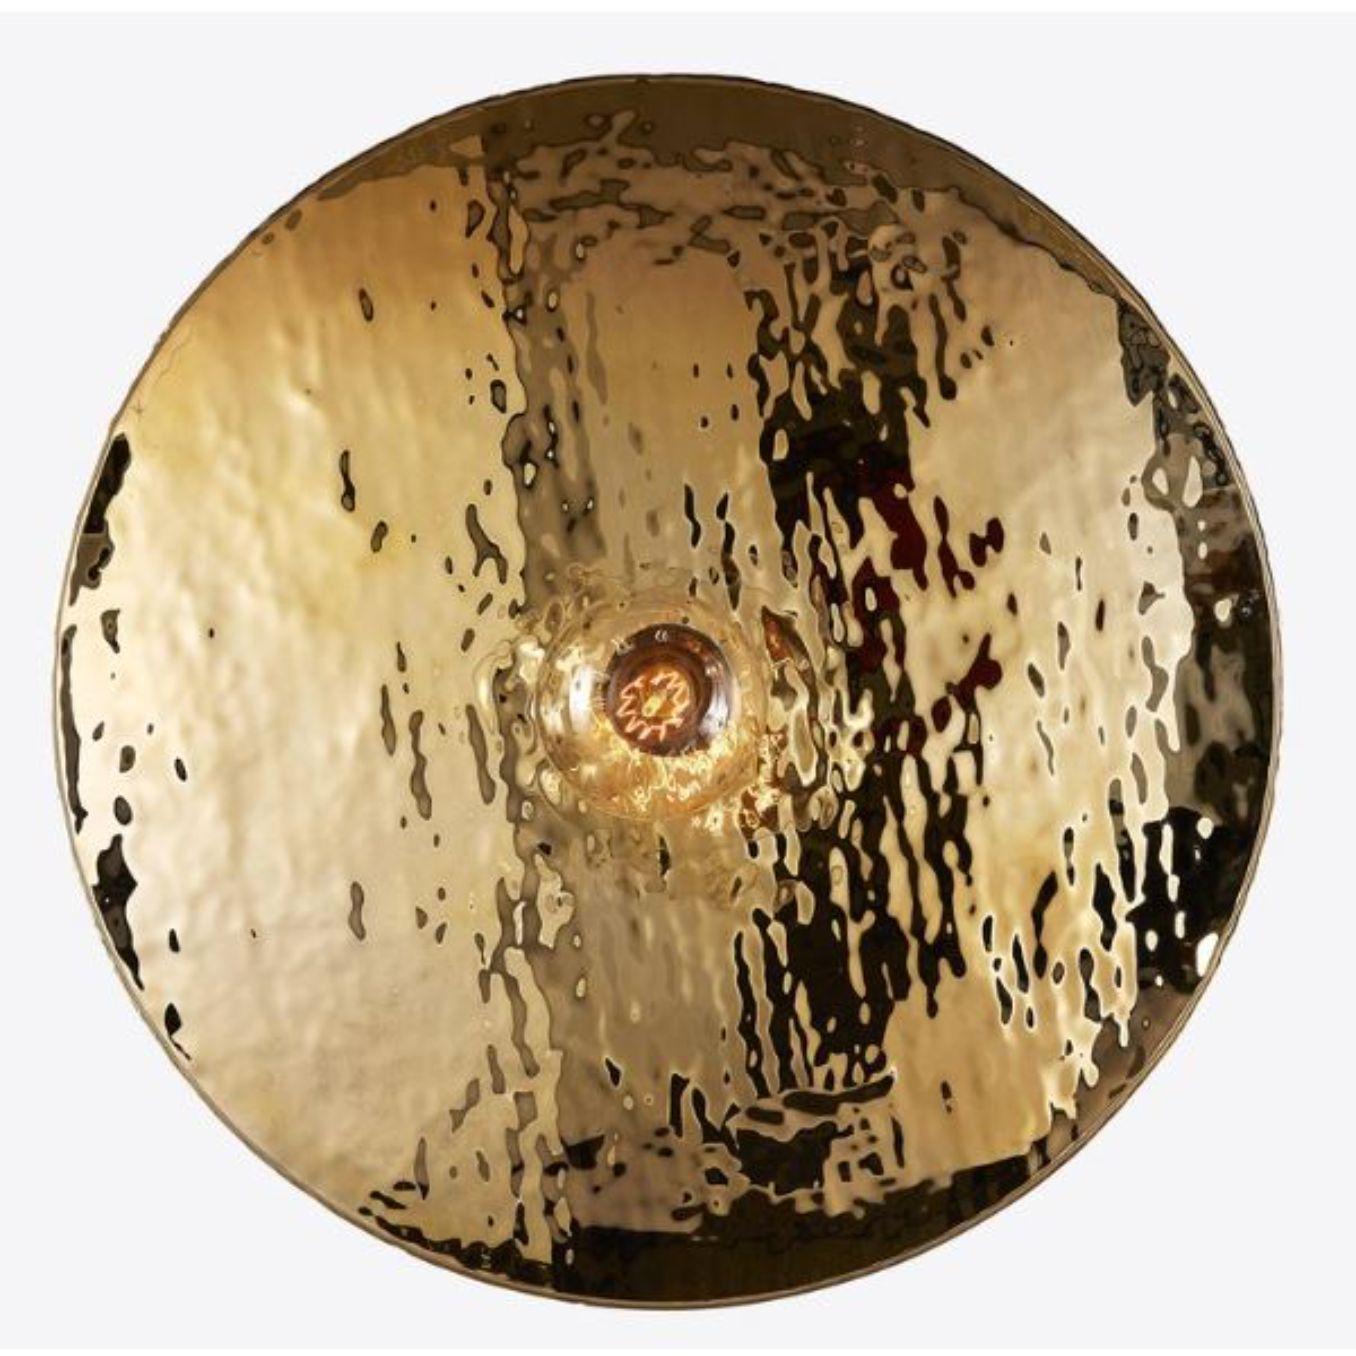 Nebbia wall light, gold & large by RADAR
Design: Bastien Taillard
Materials: Metal, glass
Dimensions: Depth 15 x Diameter 70 cm
Also available in different colors: silver, bronze, Iris. and materials: Solid oak.

All our lamps can be wired